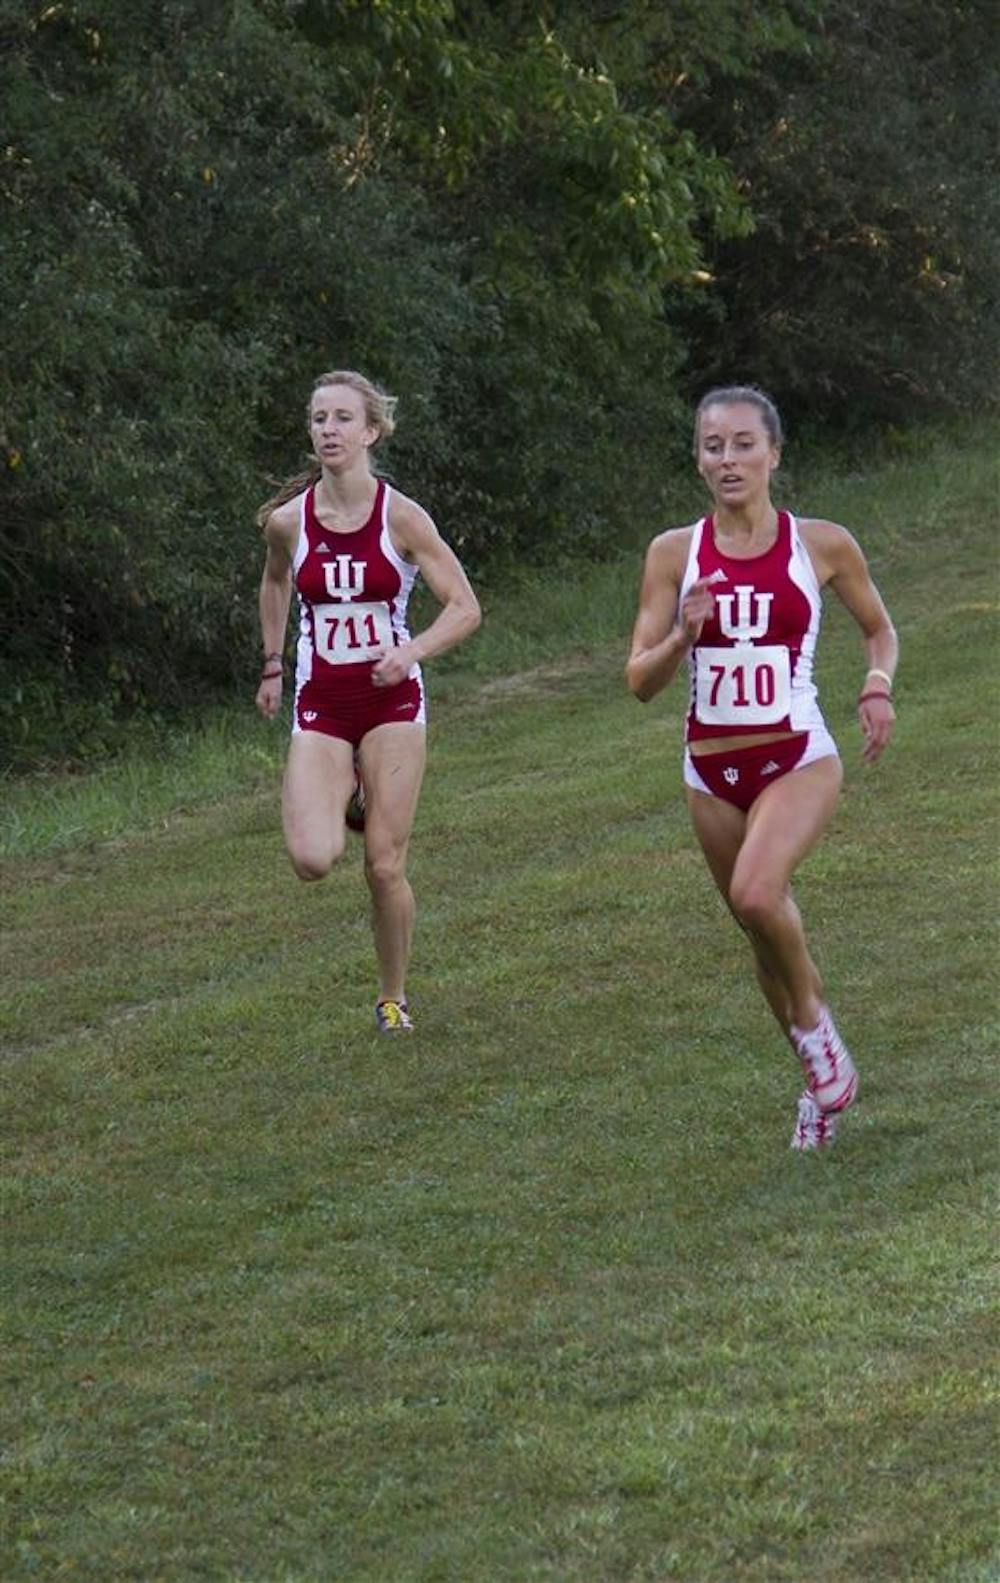 Senior Samantha Ginther runs with junior Kelsey Duerksen during the Indiana Open on Sept. 7 at the IU Cross Country Course. Ginther finished second in the race.